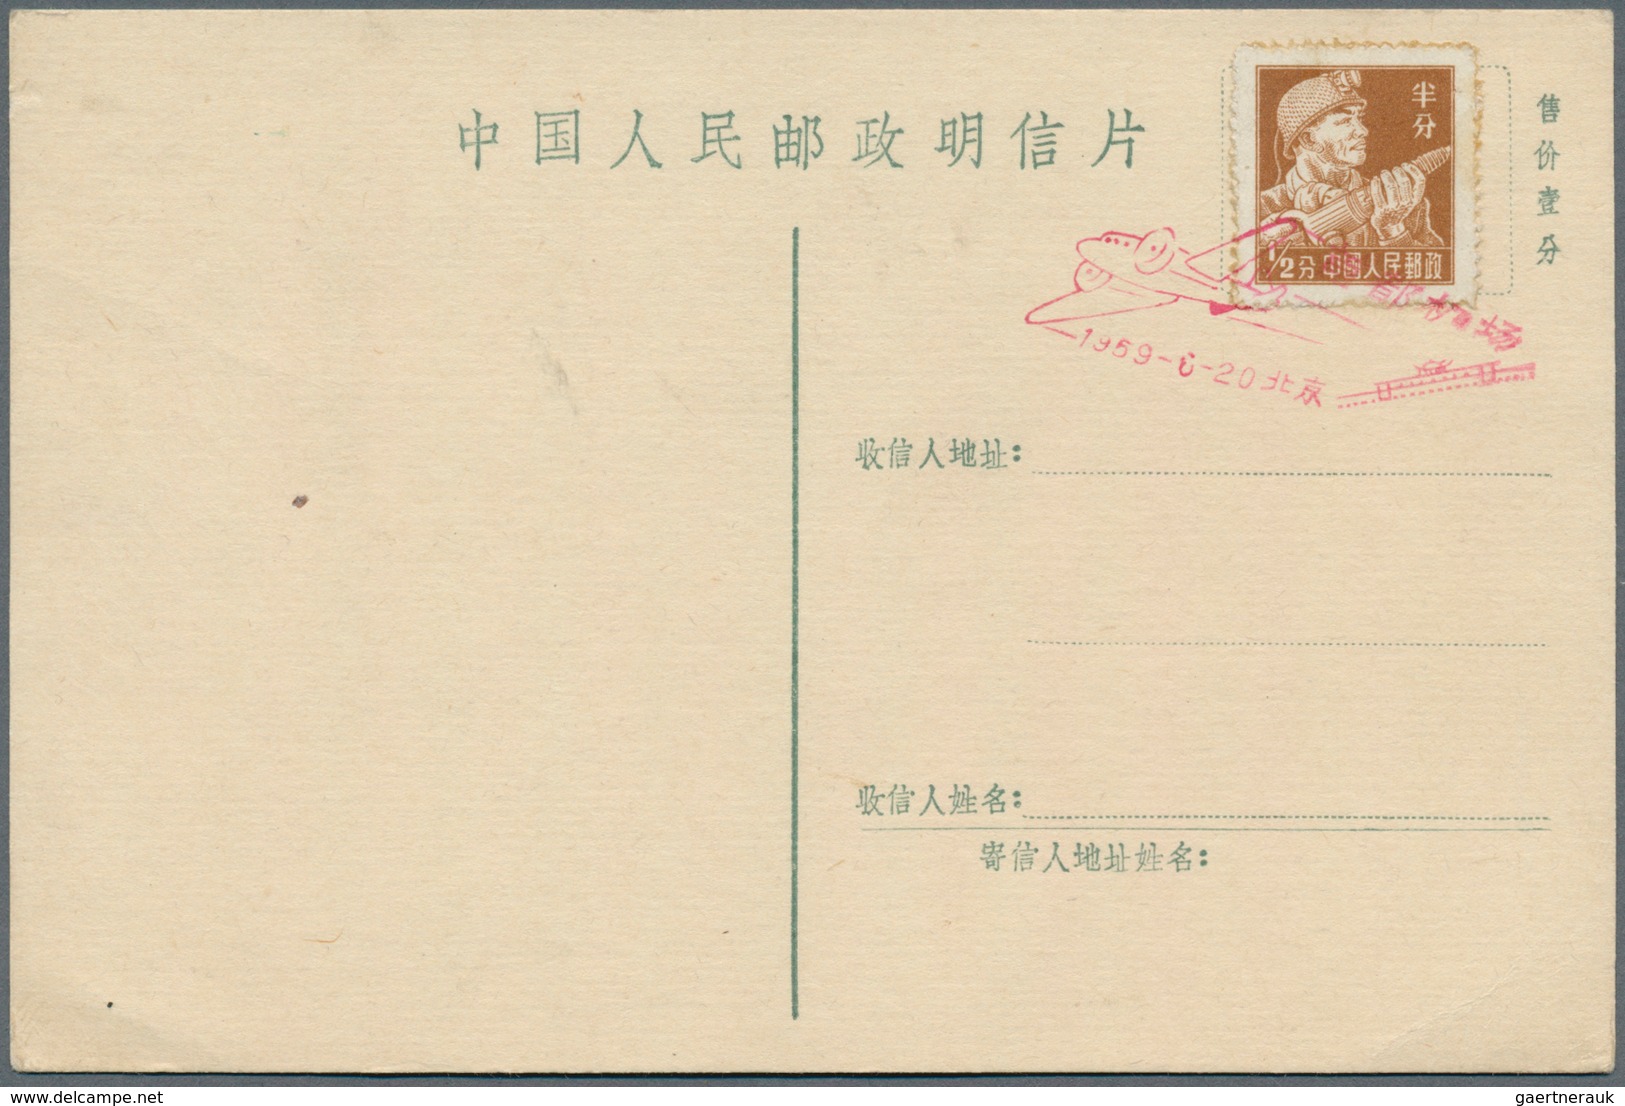 22453 China - Volksrepublik: 1965/87, covers (14), used ppc (2) to West Germany, inc. several with complet